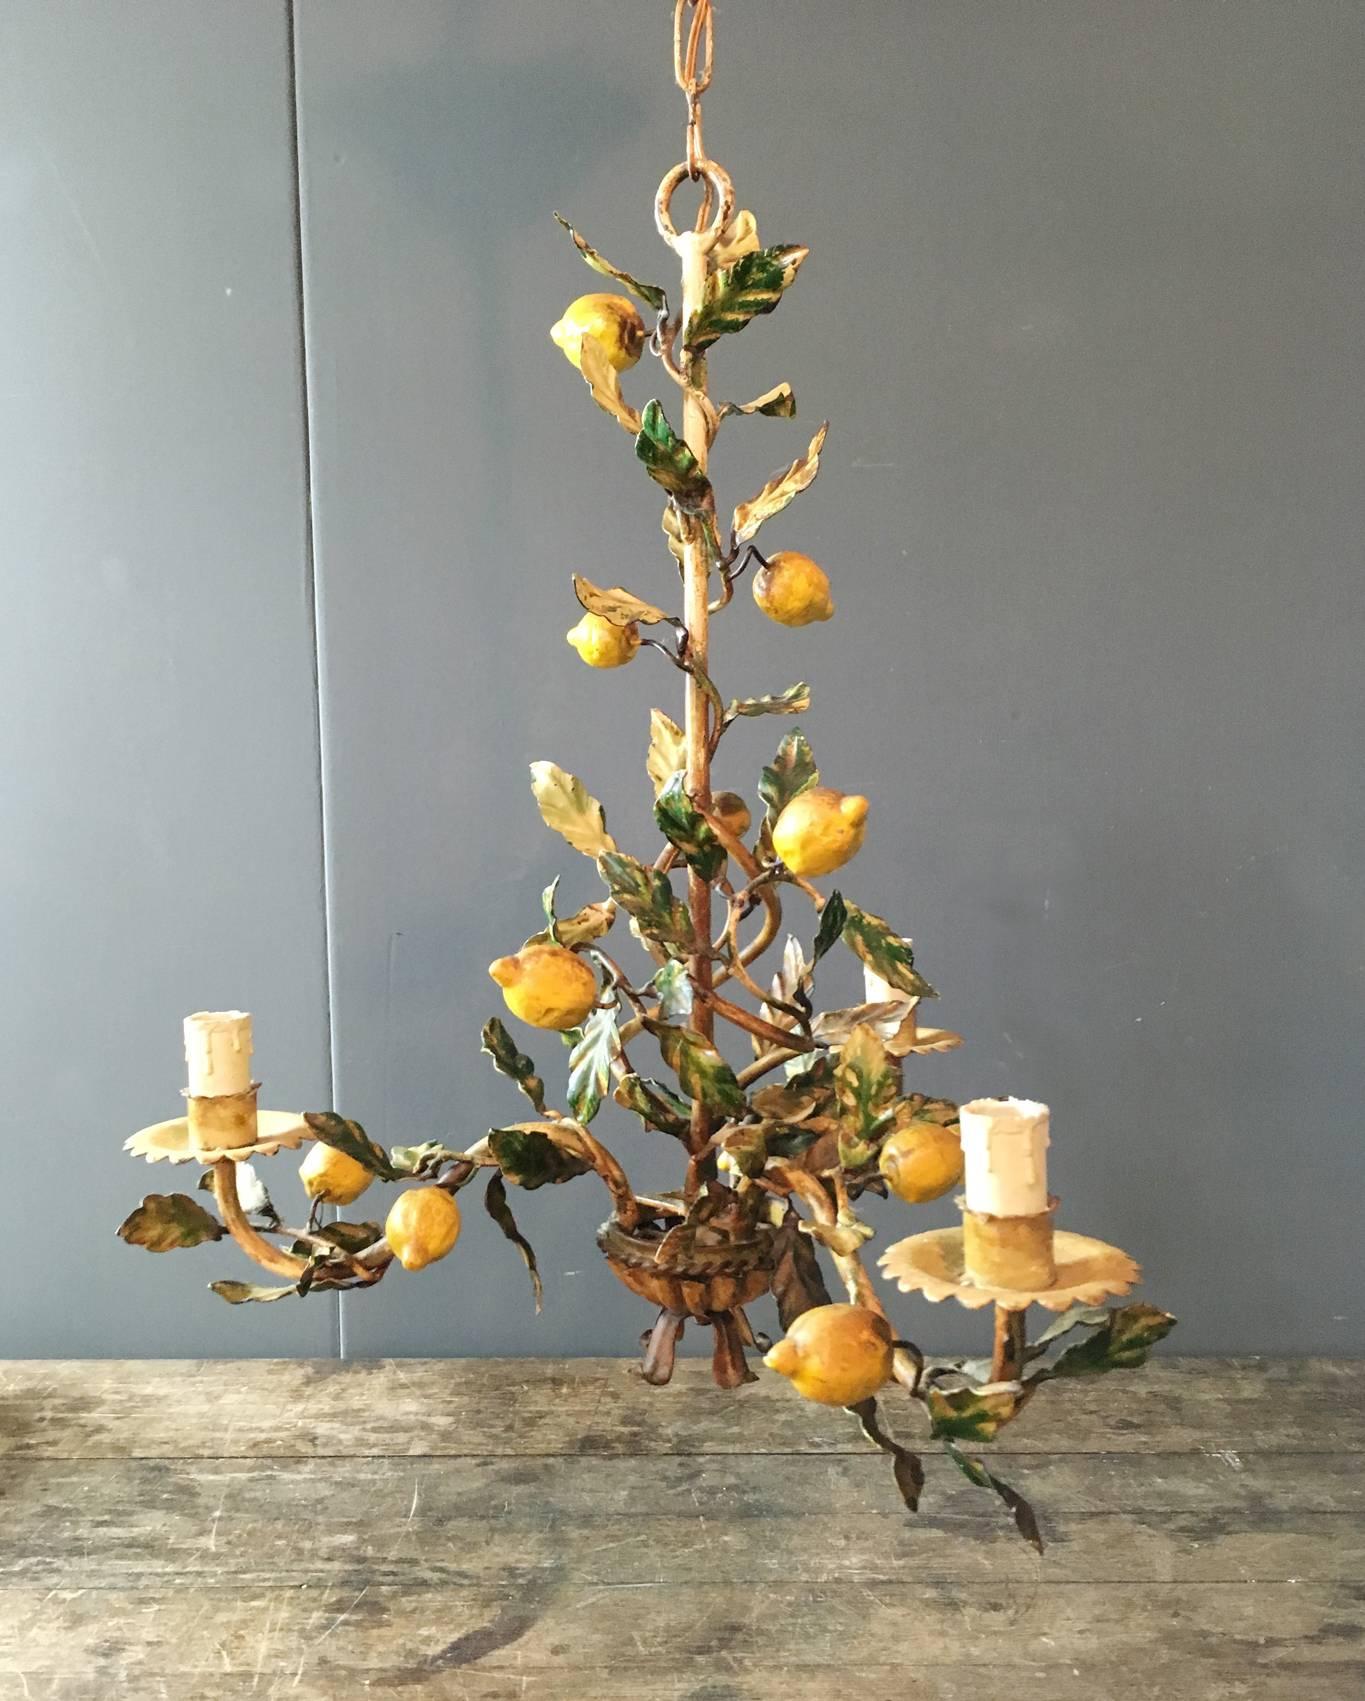 Rare Italian handmade hand-painted lemon tole light

The light has three bulb holders and its original chain and rose

Measures: 78cm total height base to top of rose
52cm height base to top ring
51cm width

This is a beautiful and rare piece,